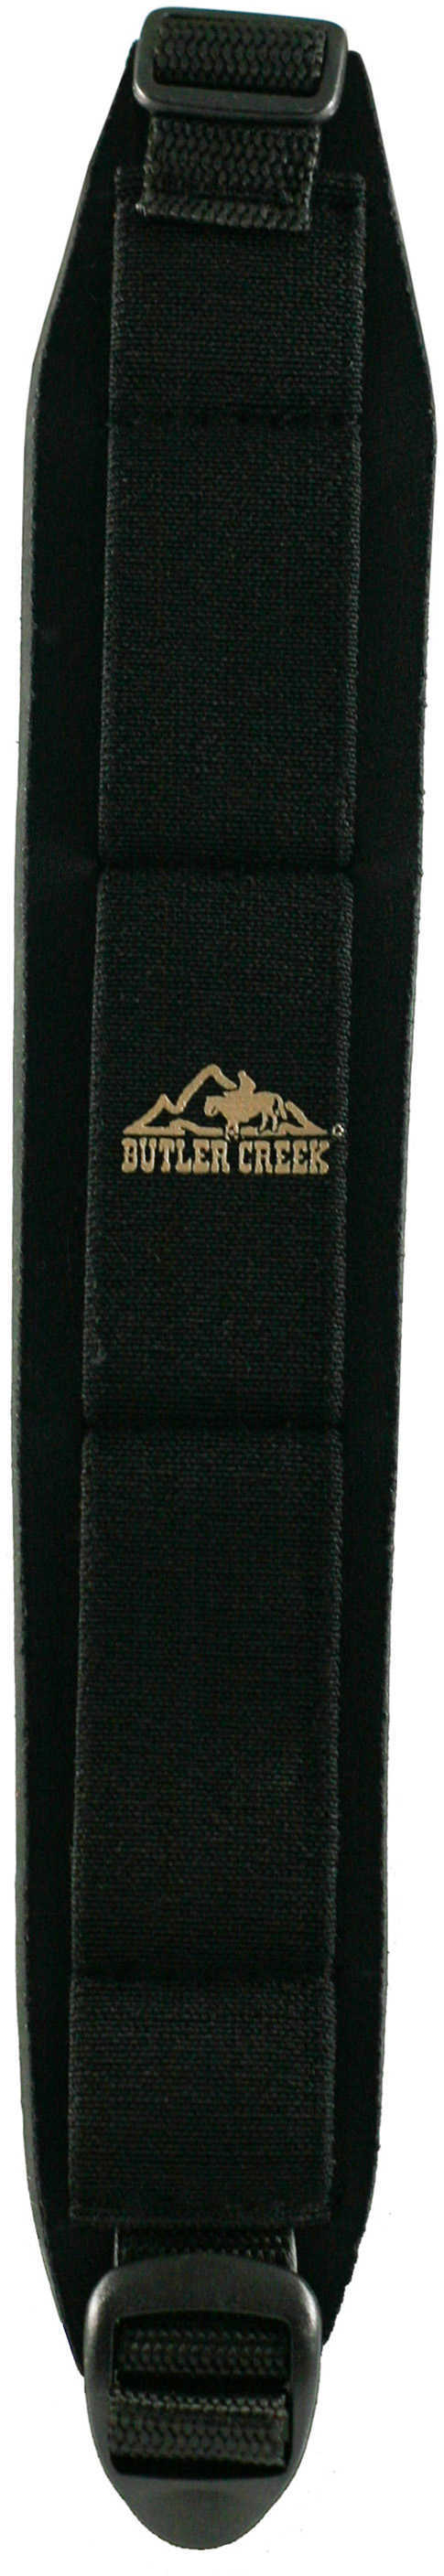 Butler Creek Shotgun Sling With Non Slip Grip/No Swivels Required Md: 80023